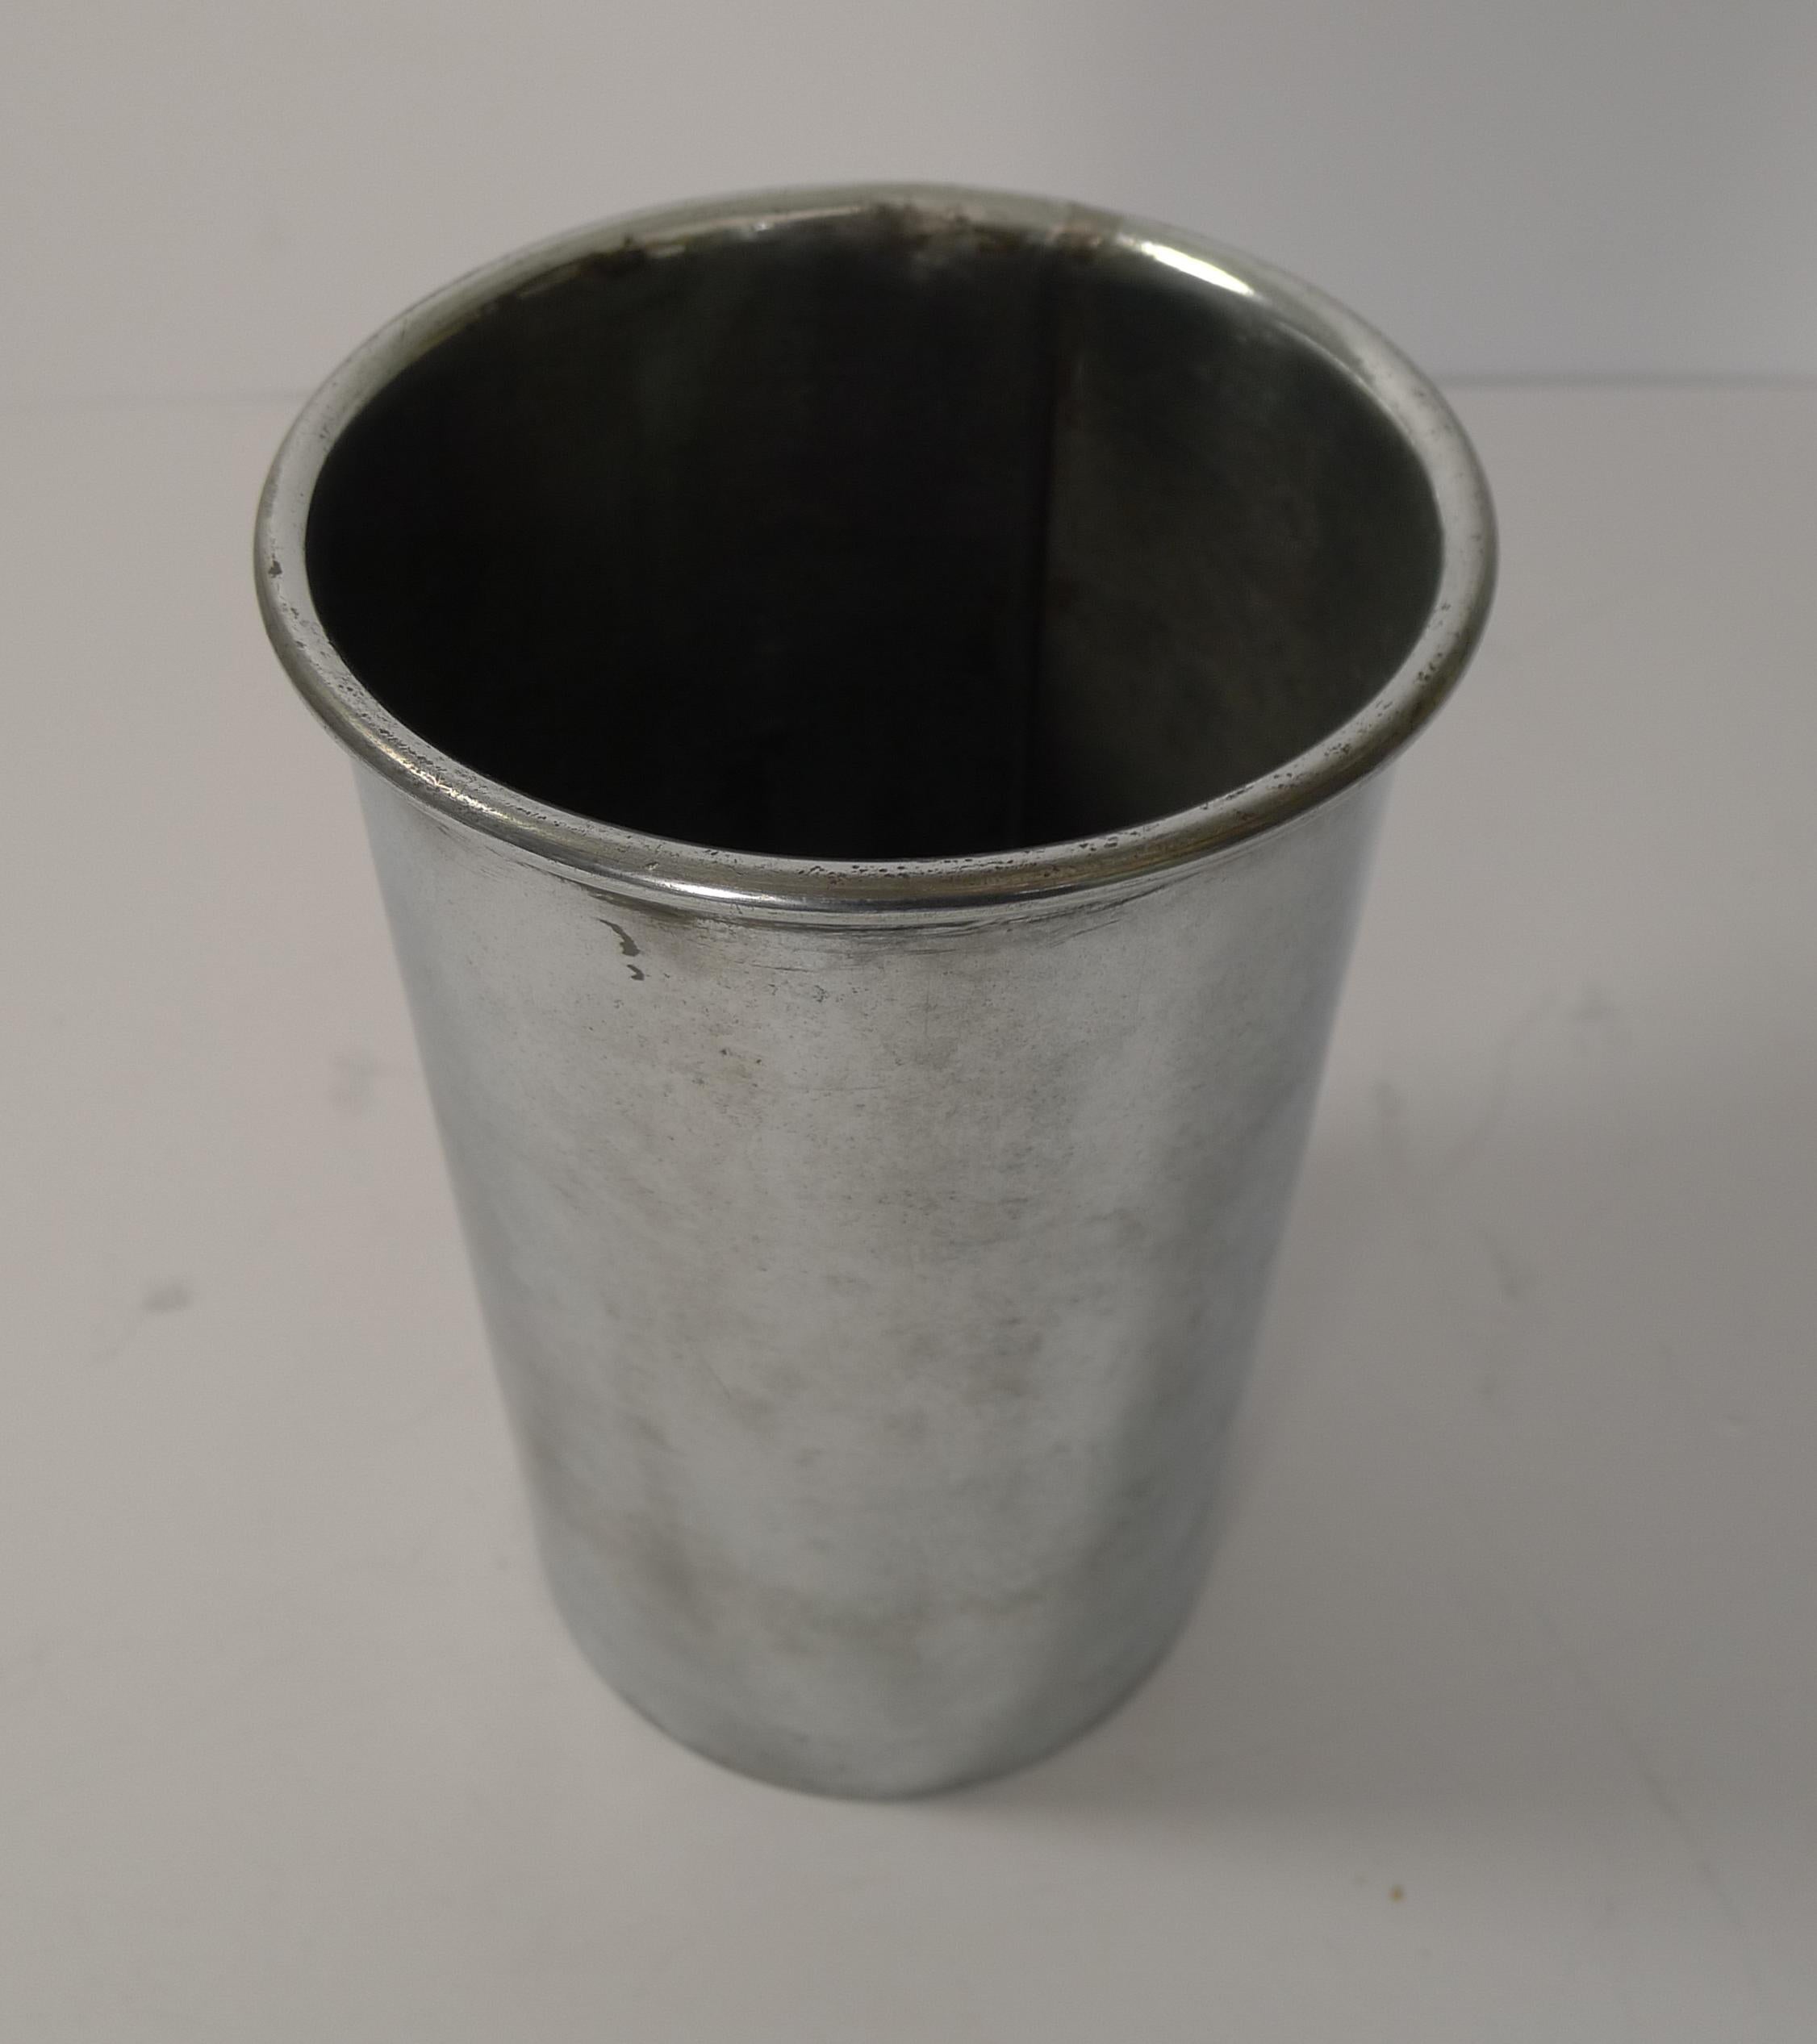 A magnificent Christofle et Cie large Champagne bucket, dating from the 19th century, this is a rare early top-notch example dating to the late 19th century.

It comes complete with the original zinc bottle liner. The handles are beautifully